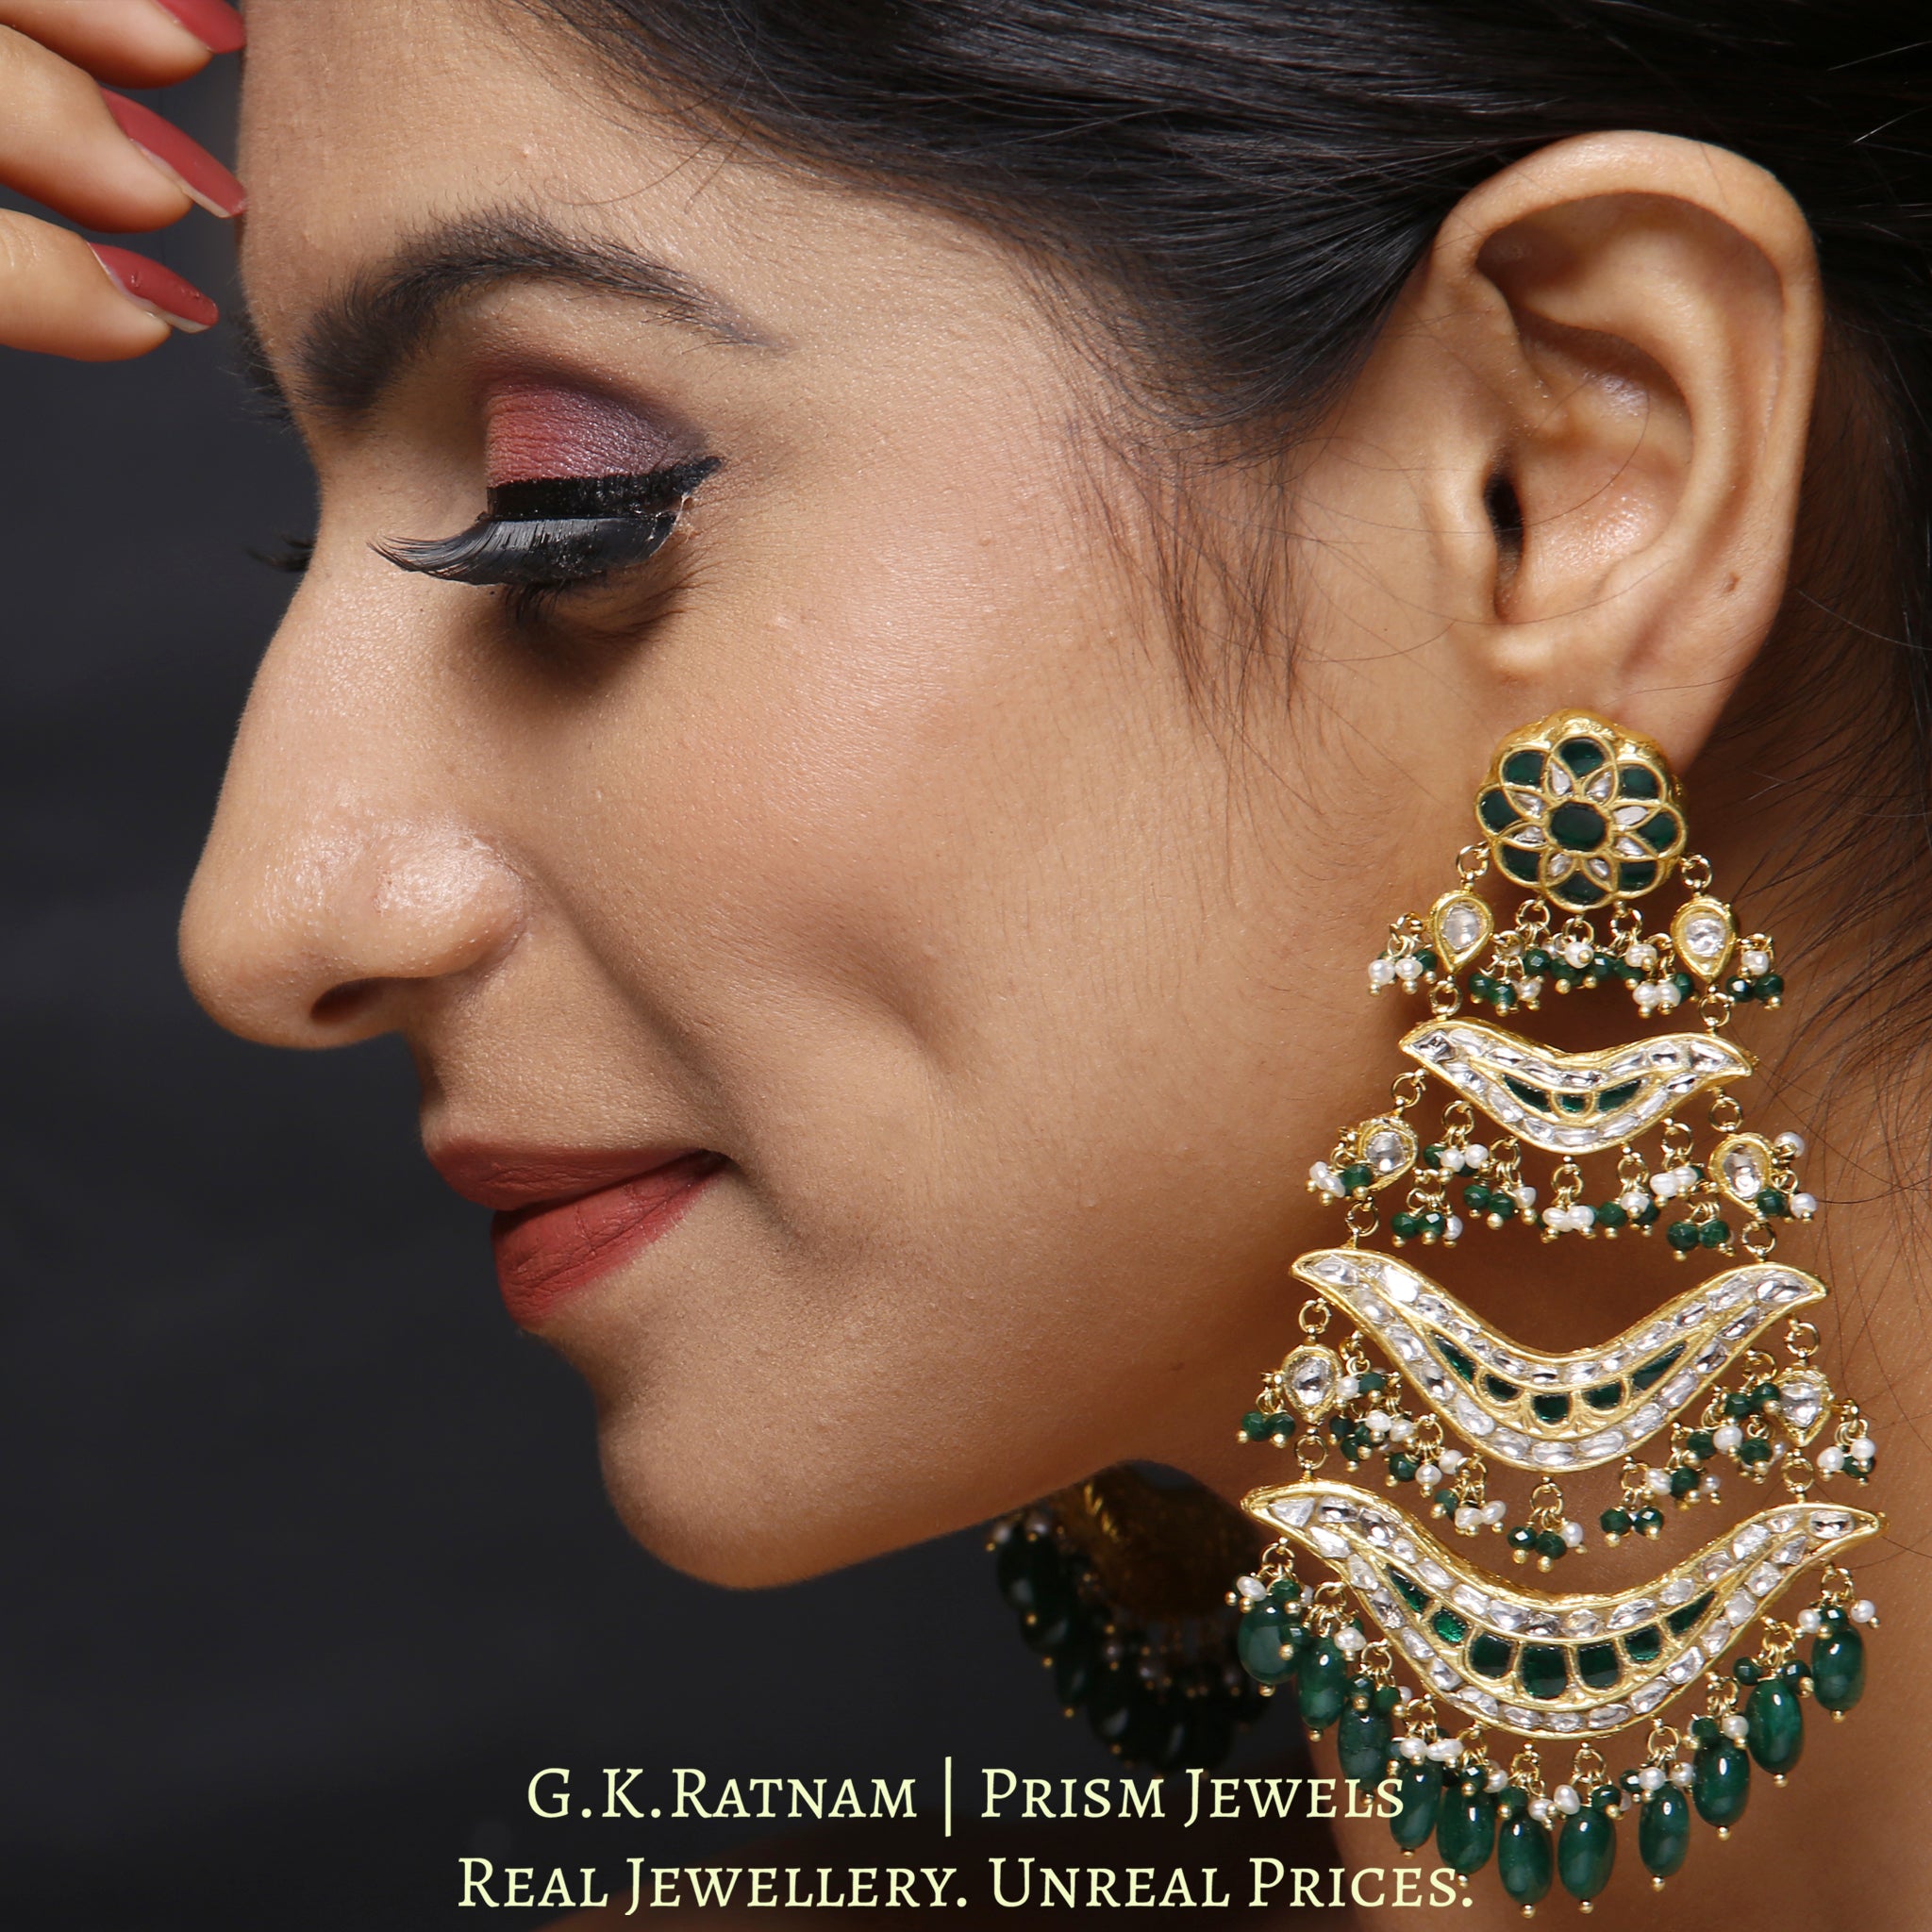 23k Gold and Diamond Polki pasa-style Chandelier Earring Pair with a hint of green